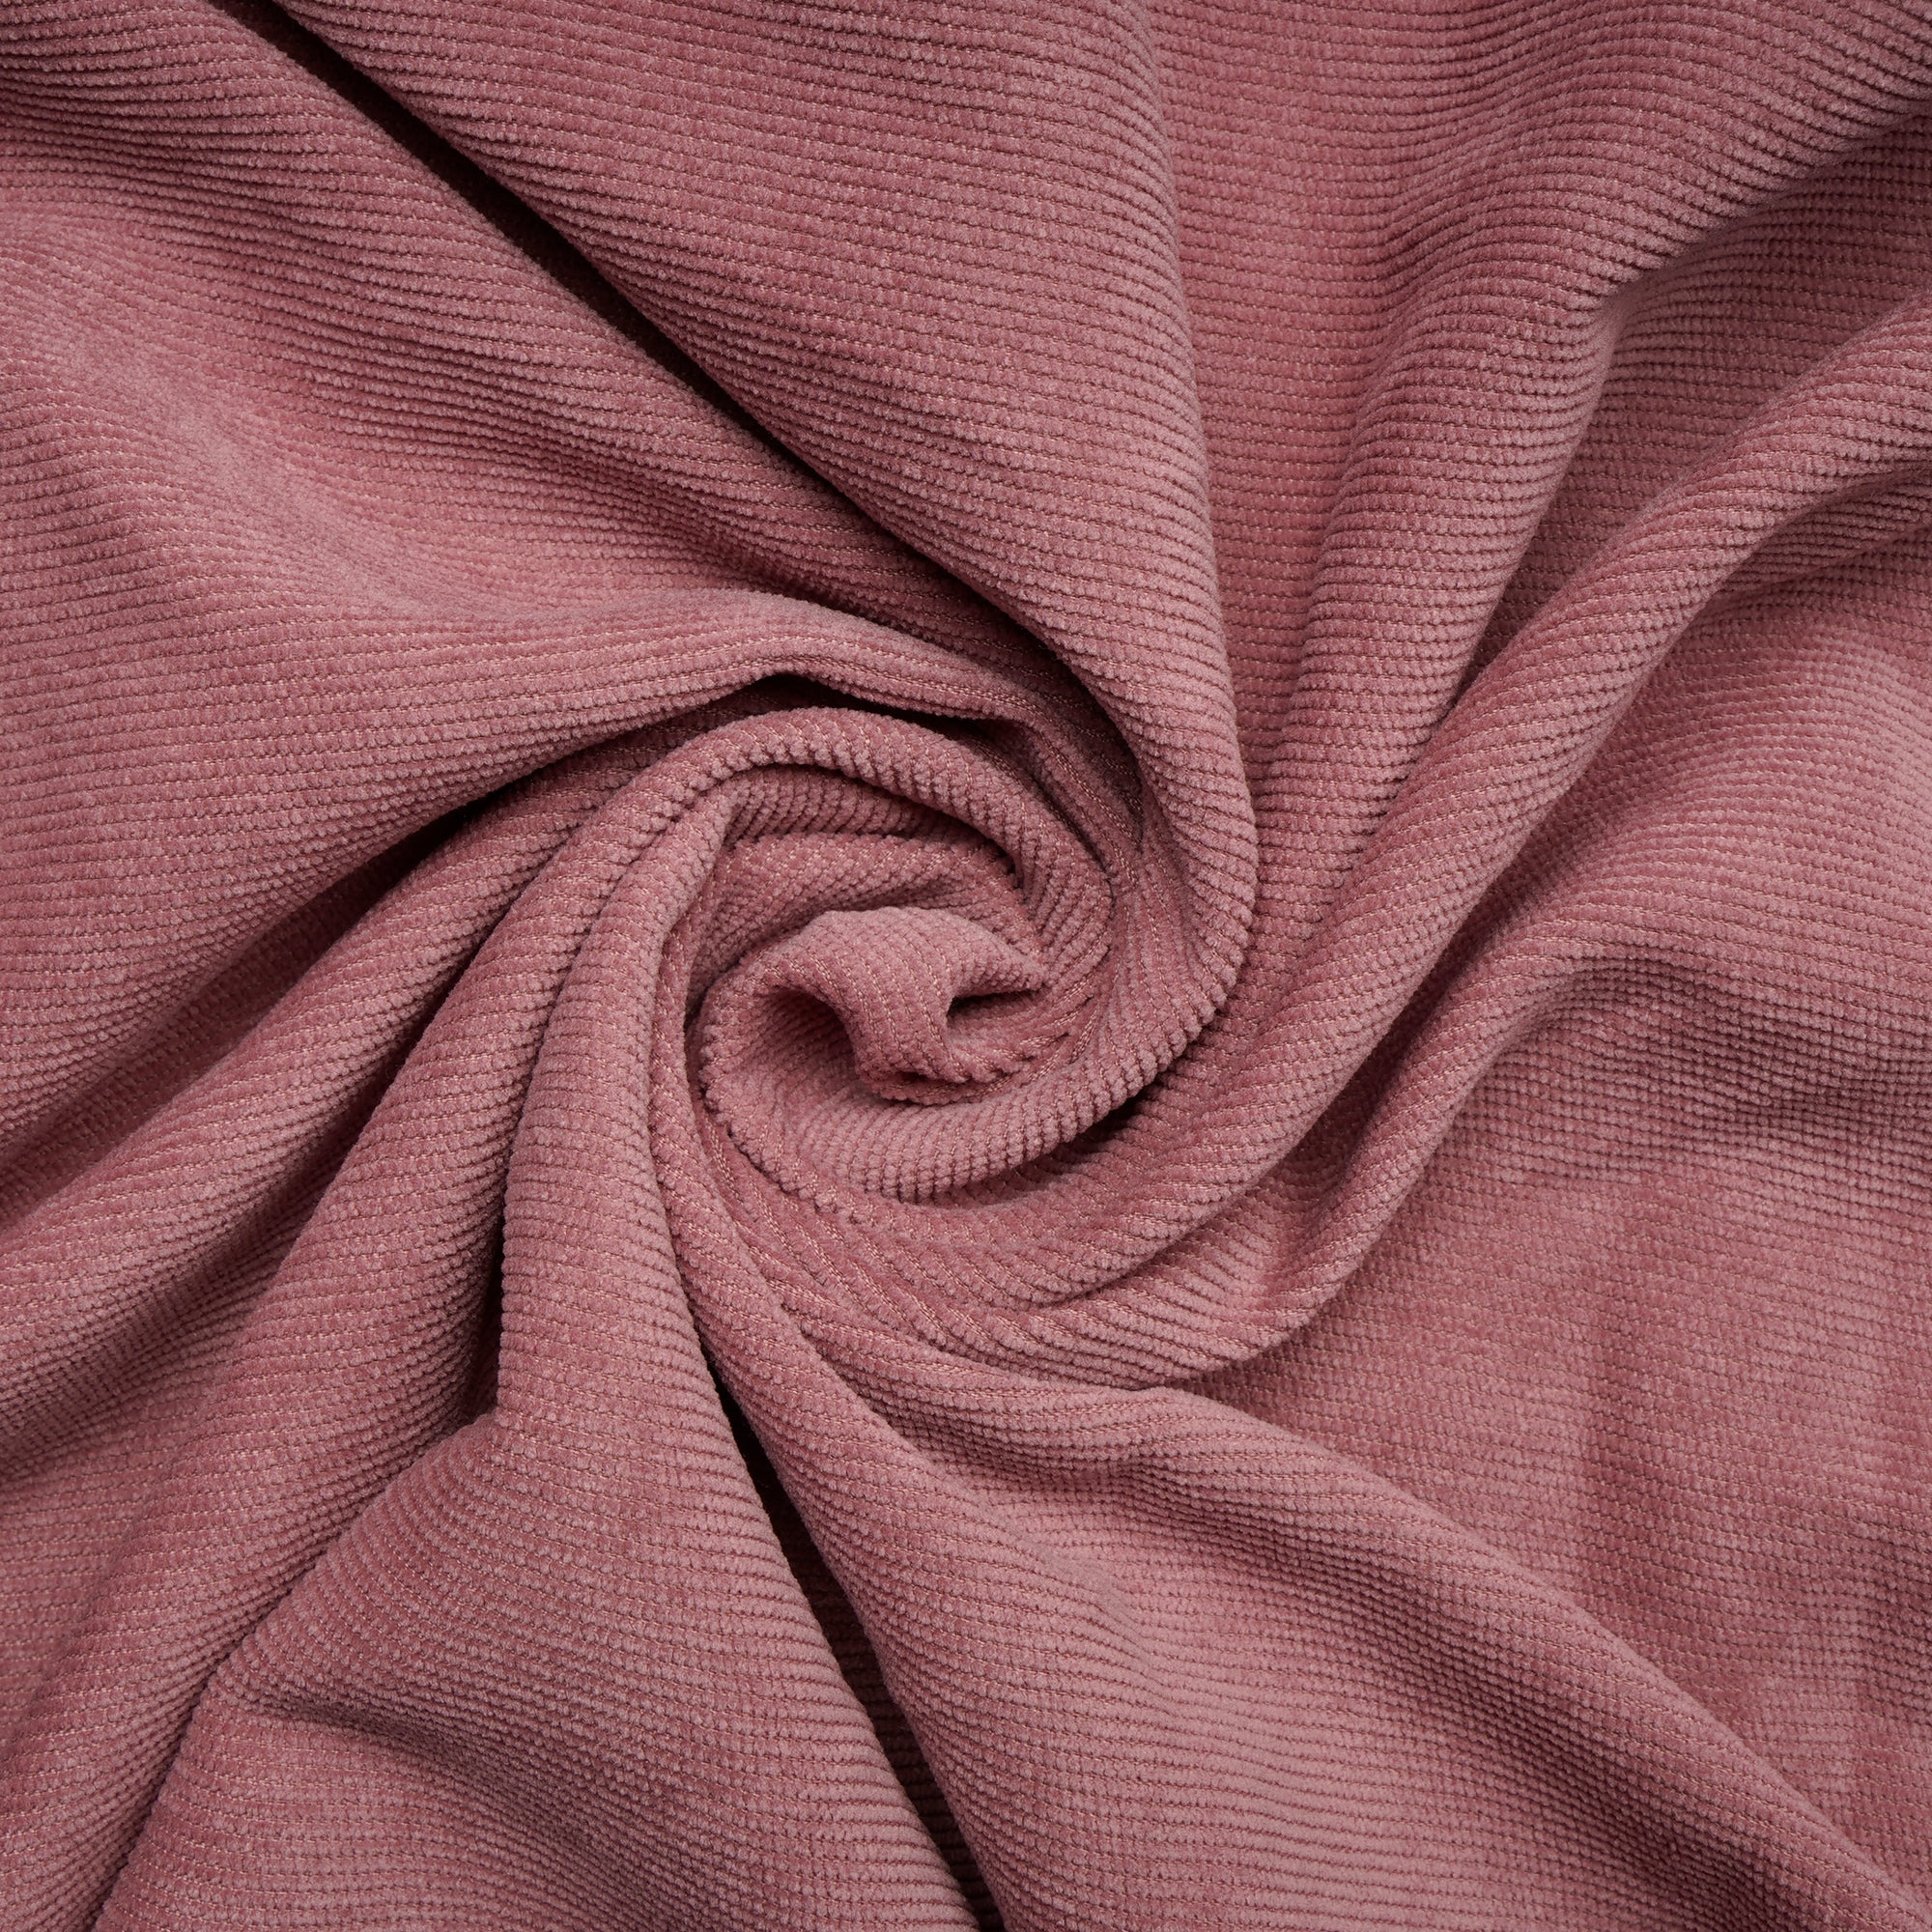 Blush Imported Cotton Corduroy Fabric (60" Wide)